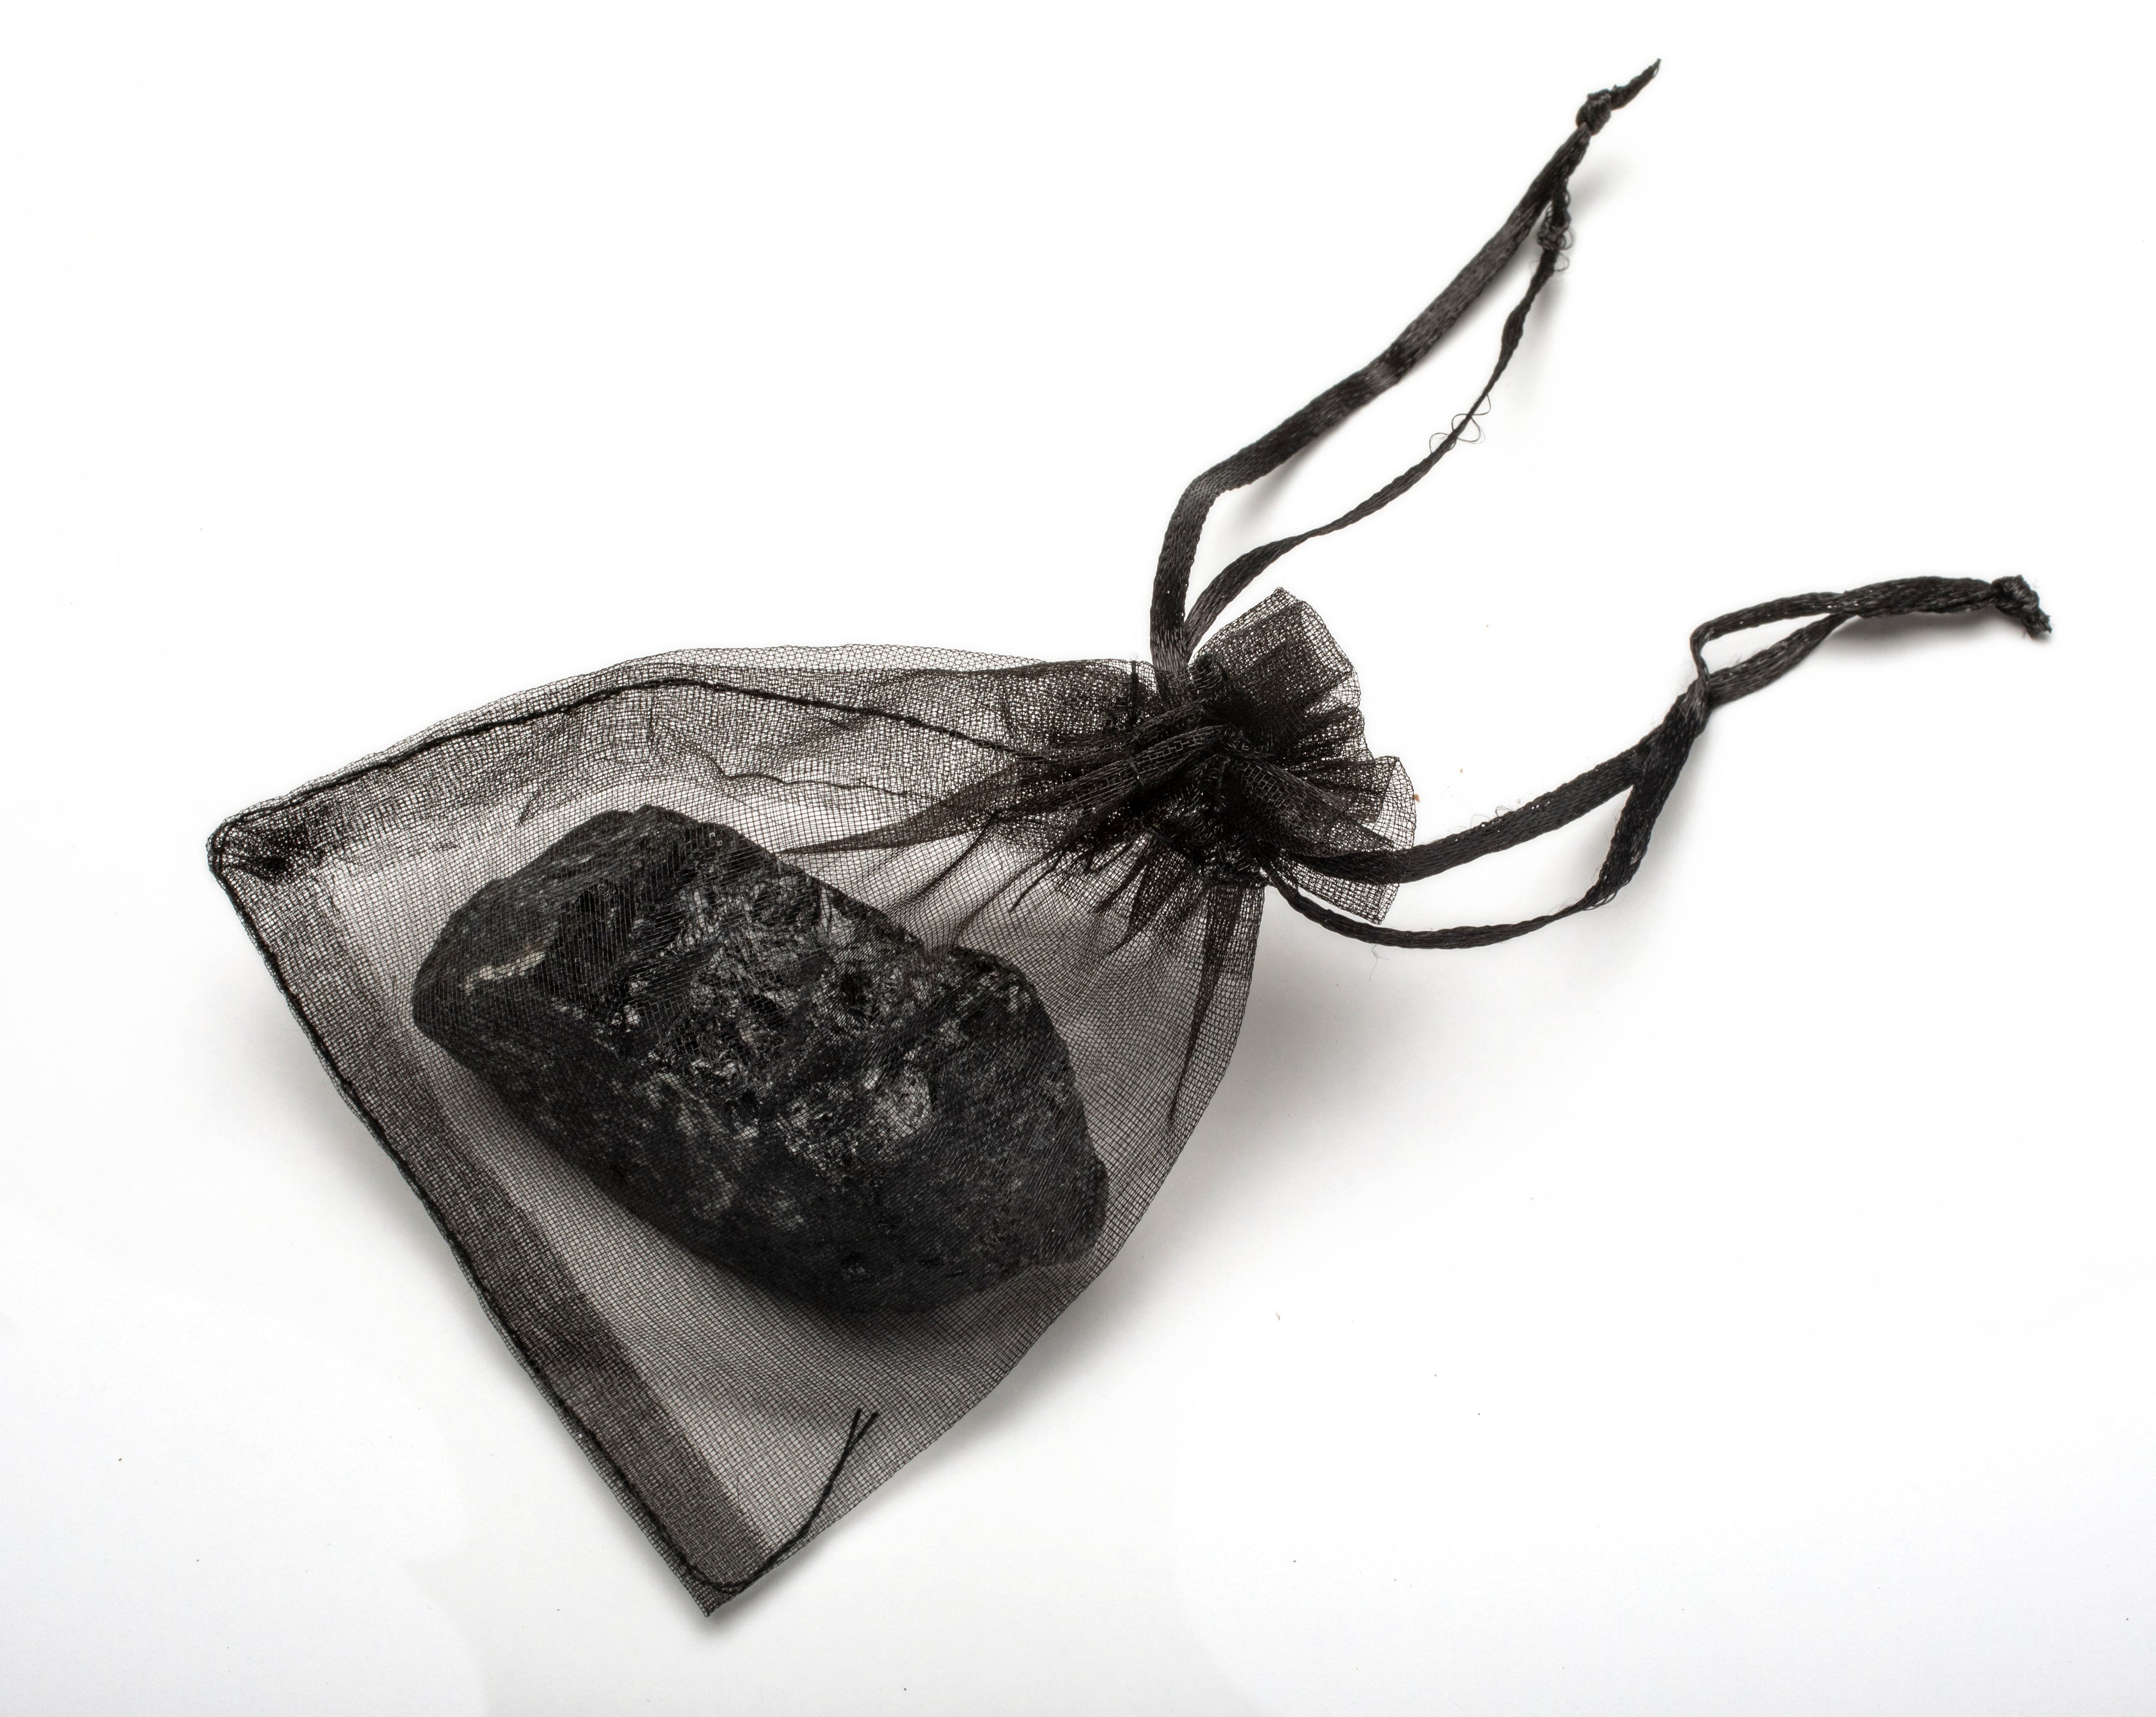 Originally found in the forests of Brazil, black tourmaline is a spiritual cleanser that mystics believe reduces stress, relaxes muscles and clears minds. 